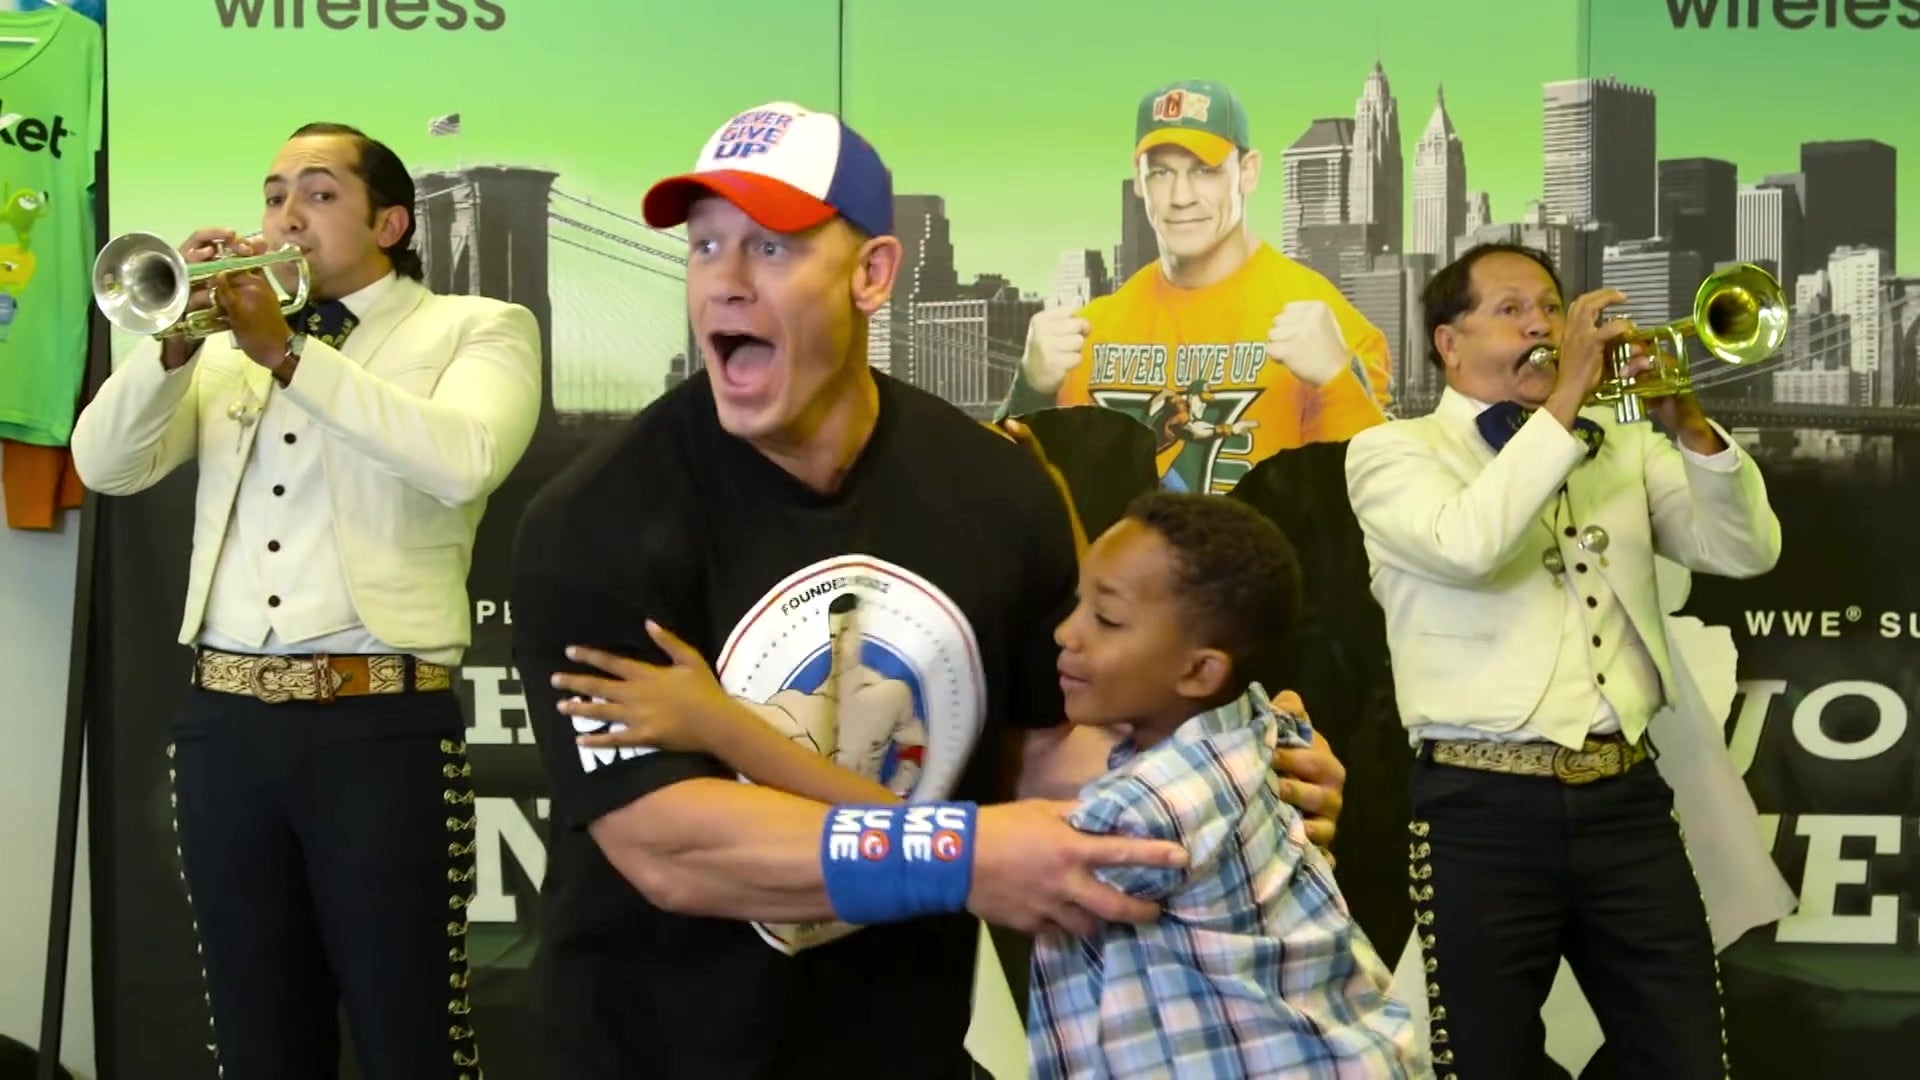 Watch Cricket Wireless customers lose it when "unexpected" John Cena busts through the wall